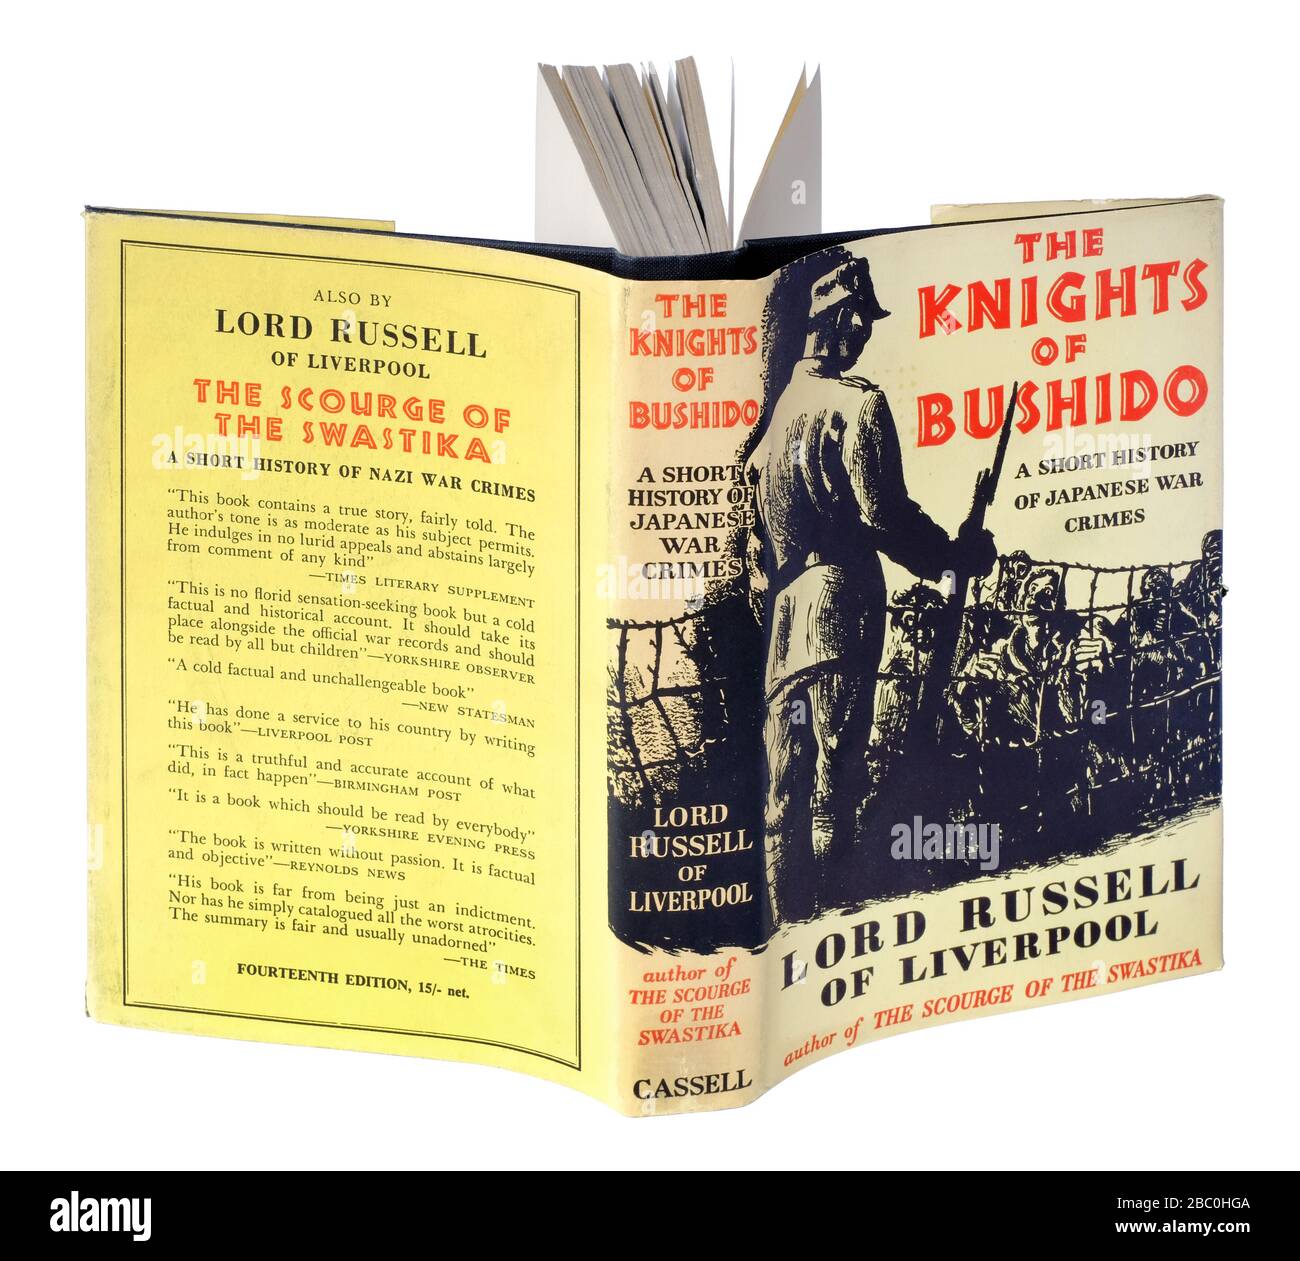 "The Knights of Bushido, A Short History of Japanese war Crimes" von Lord Russell of Liverpool (1958) Stockfoto